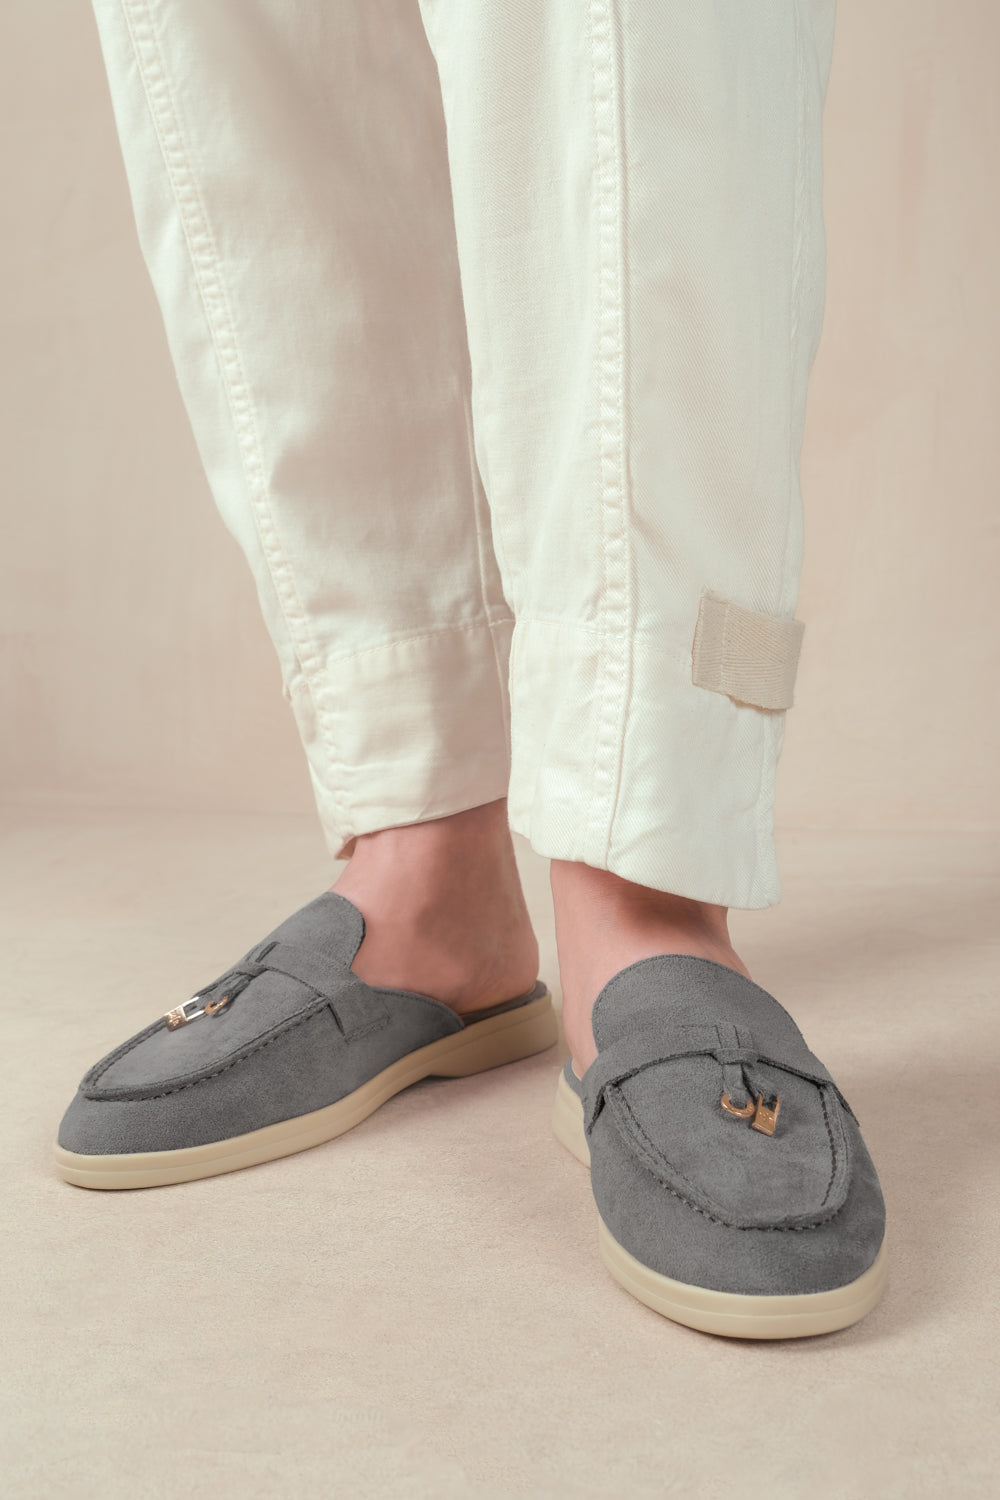 TWILIGHT FLAT SLIP ON LOAFER WITH TASSEL DETAIL IN GREY SUEDE